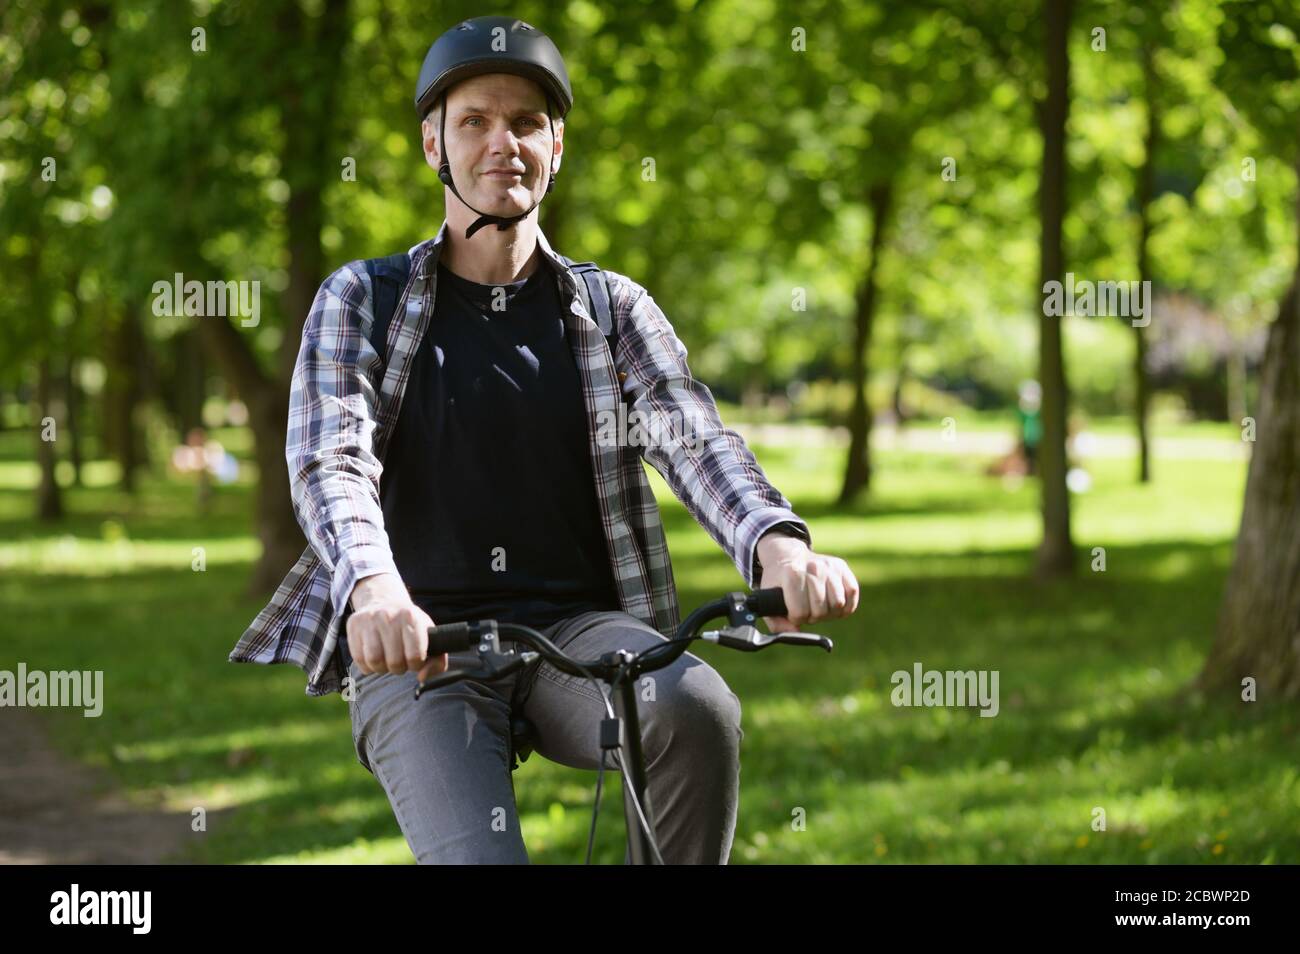 Mature Caucasian man in a bicycle helmet on his bike in a city park Stock Photo